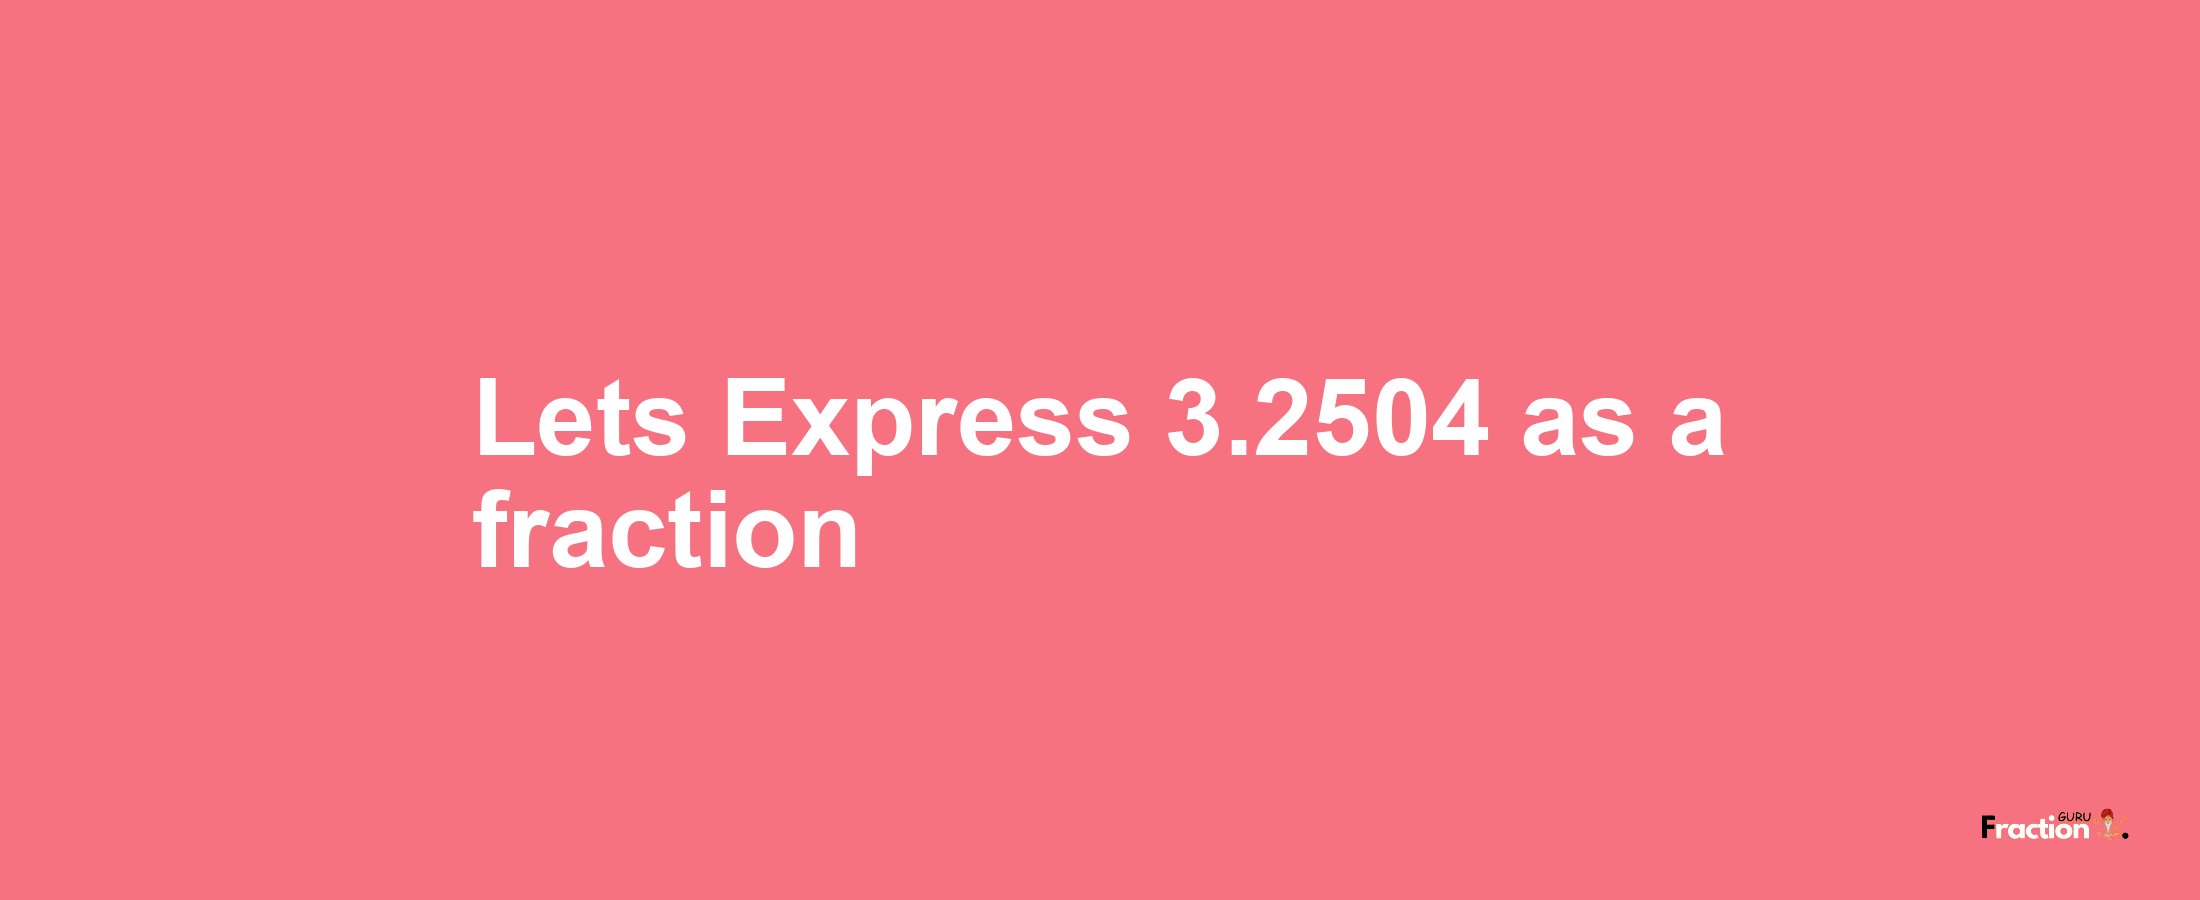 Lets Express 3.2504 as afraction